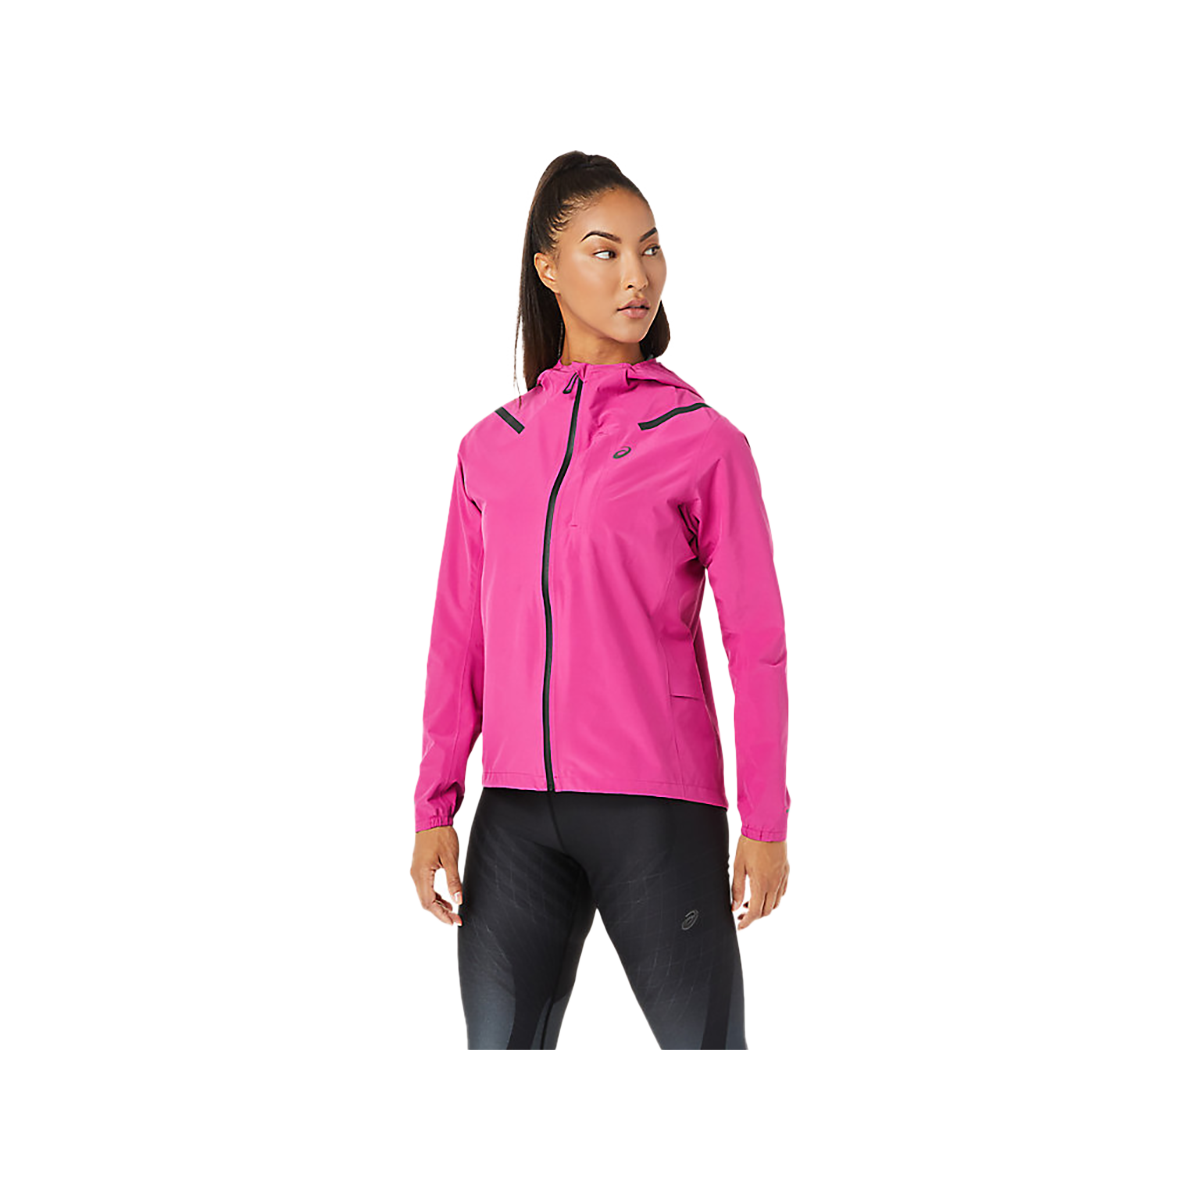 Asics Accelerate Waterproof 2.0 Jacket, , large image number null